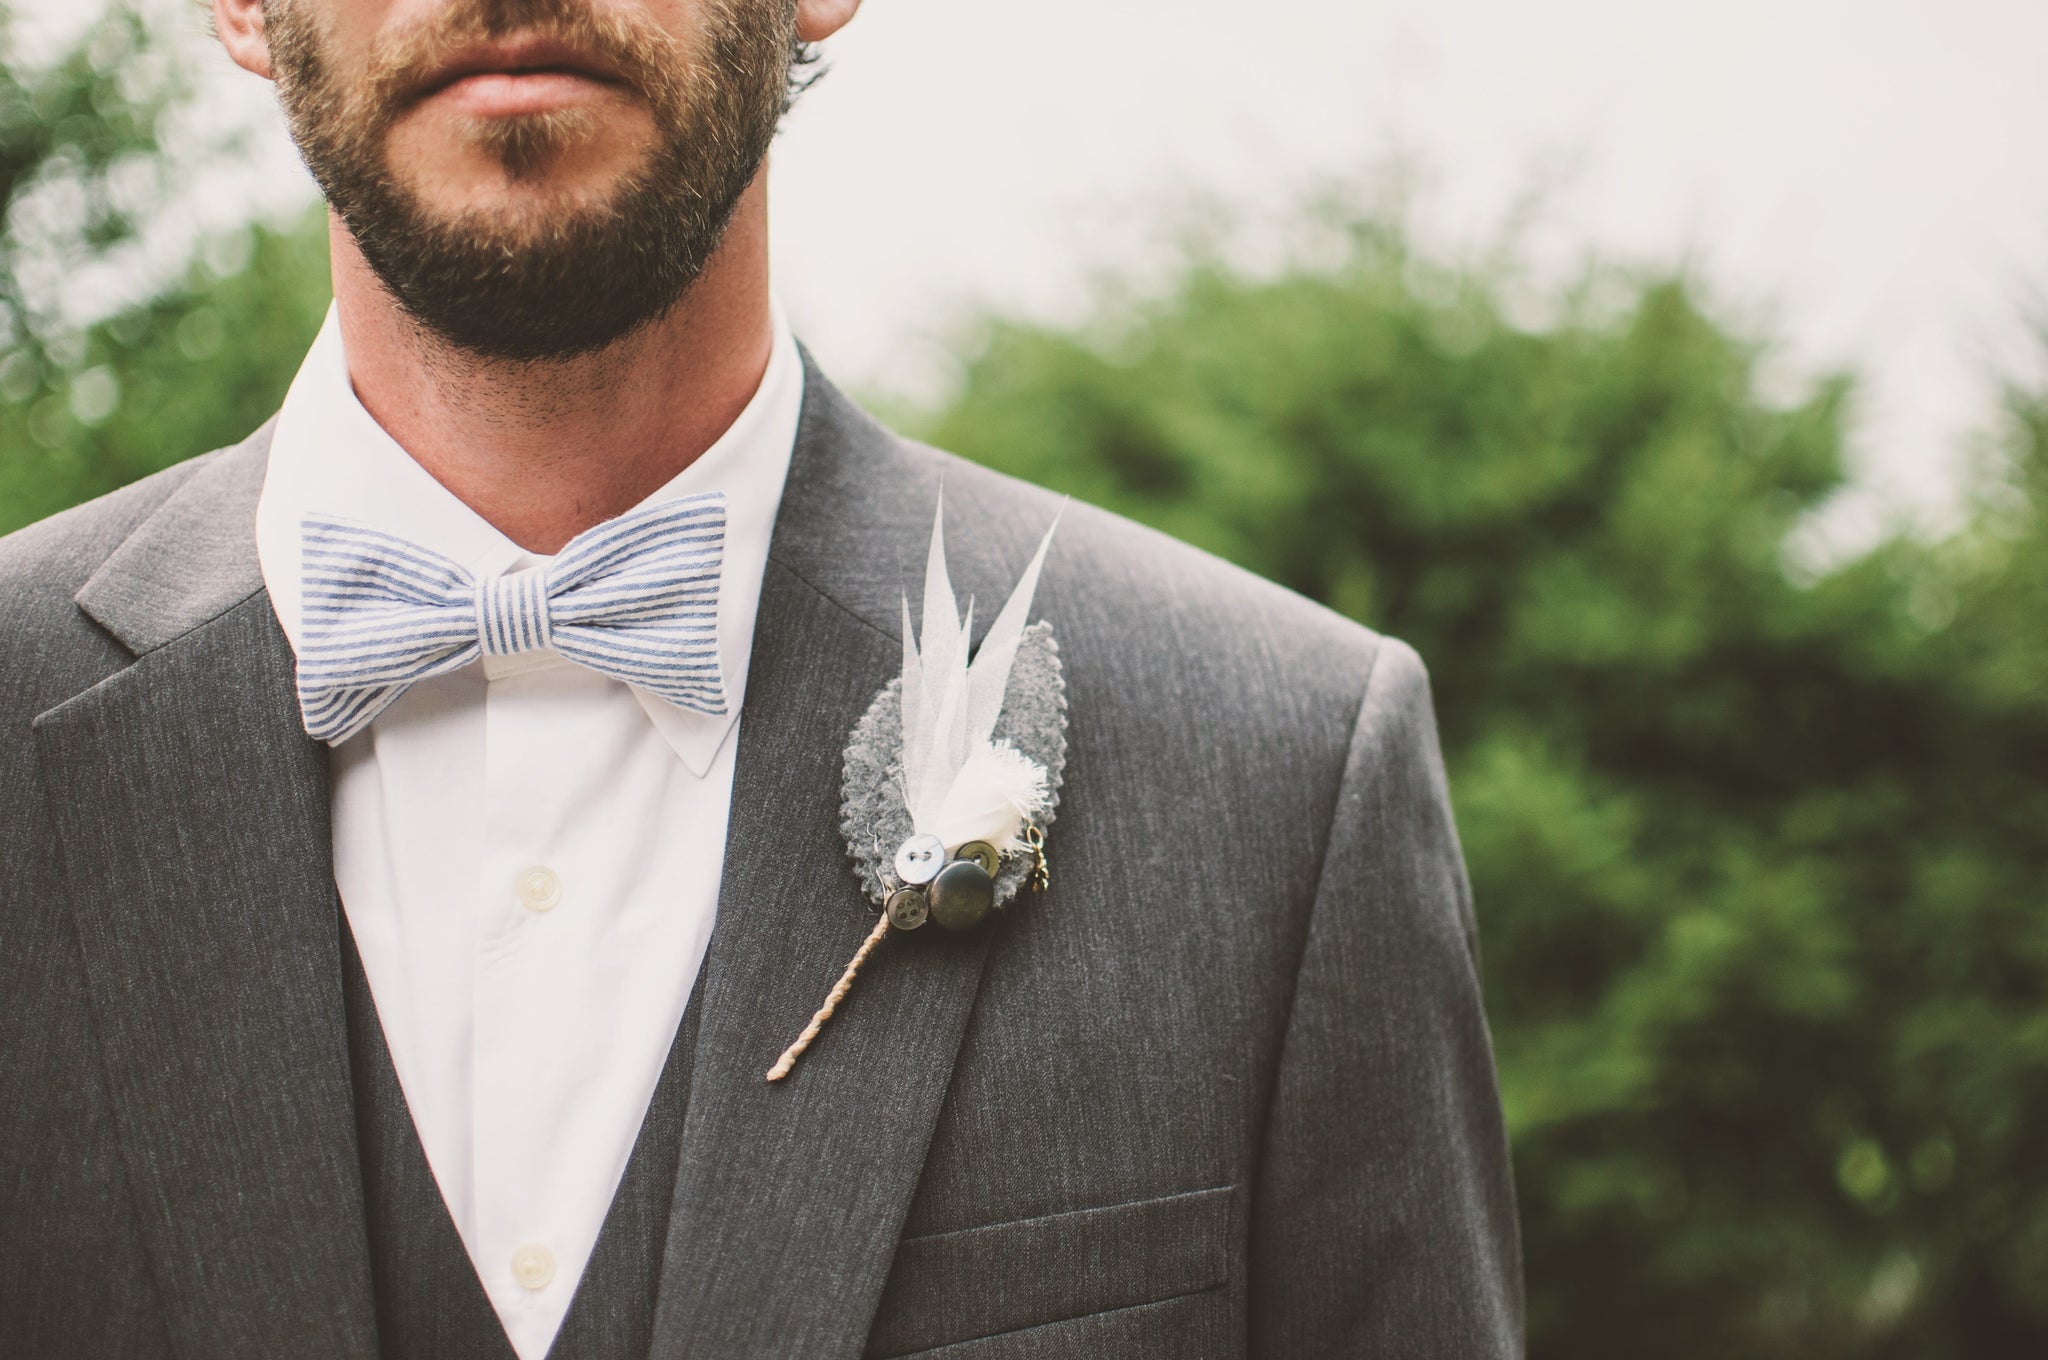 How to Attach a Brooch to Your Suit